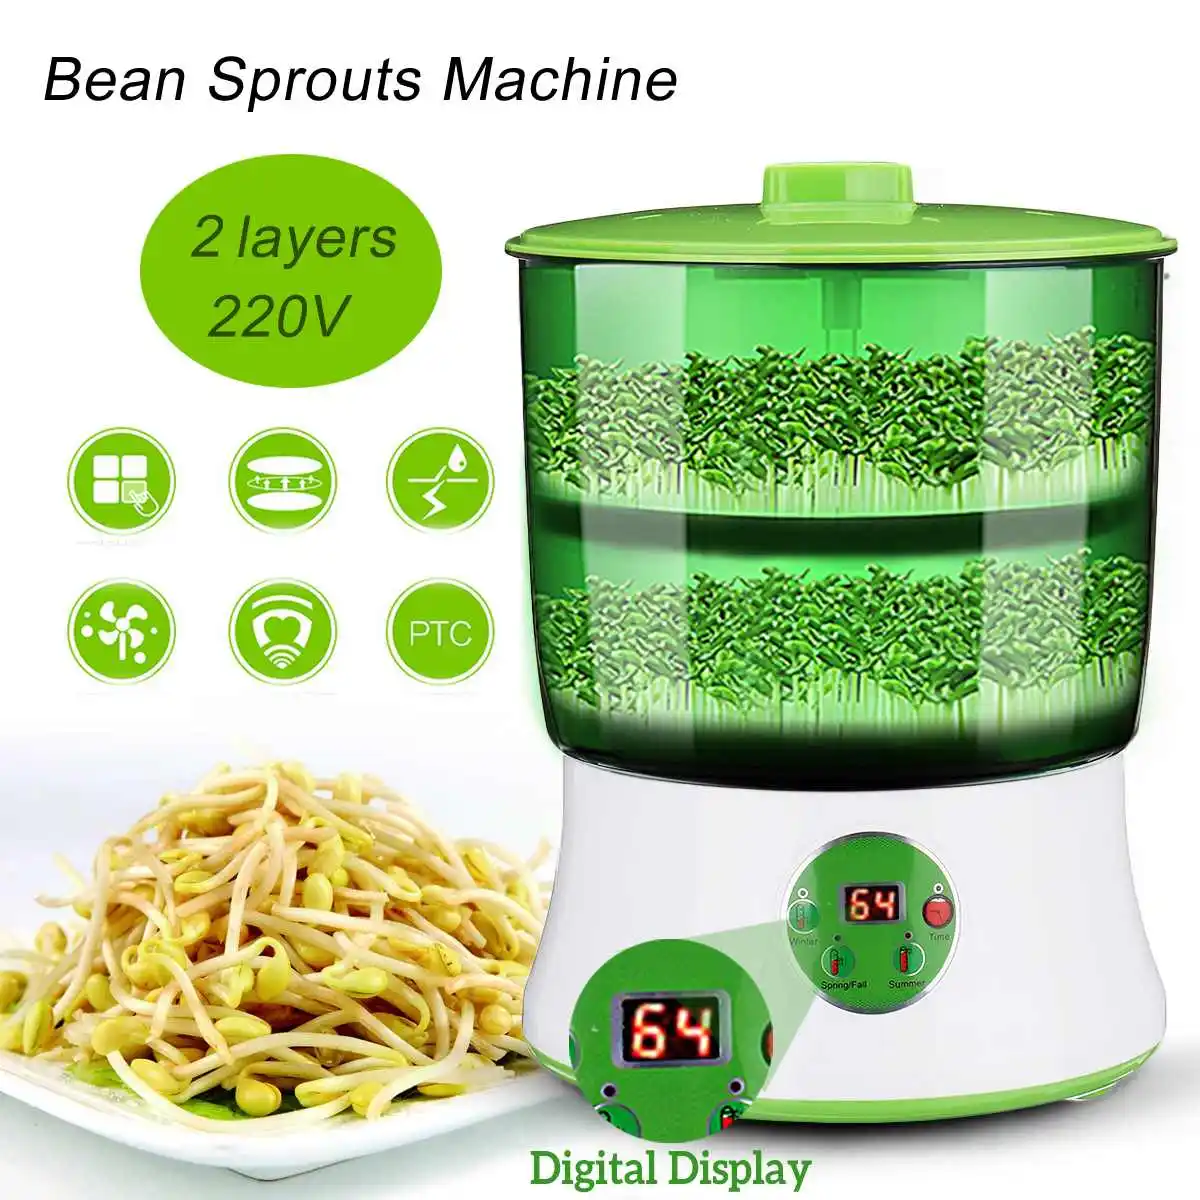 

2 Layers 220V Bean Sprouts Maker Automatic Thermostat Green Seeds Growth Bucket Electric Sprout Bean Bud Germinator Machine